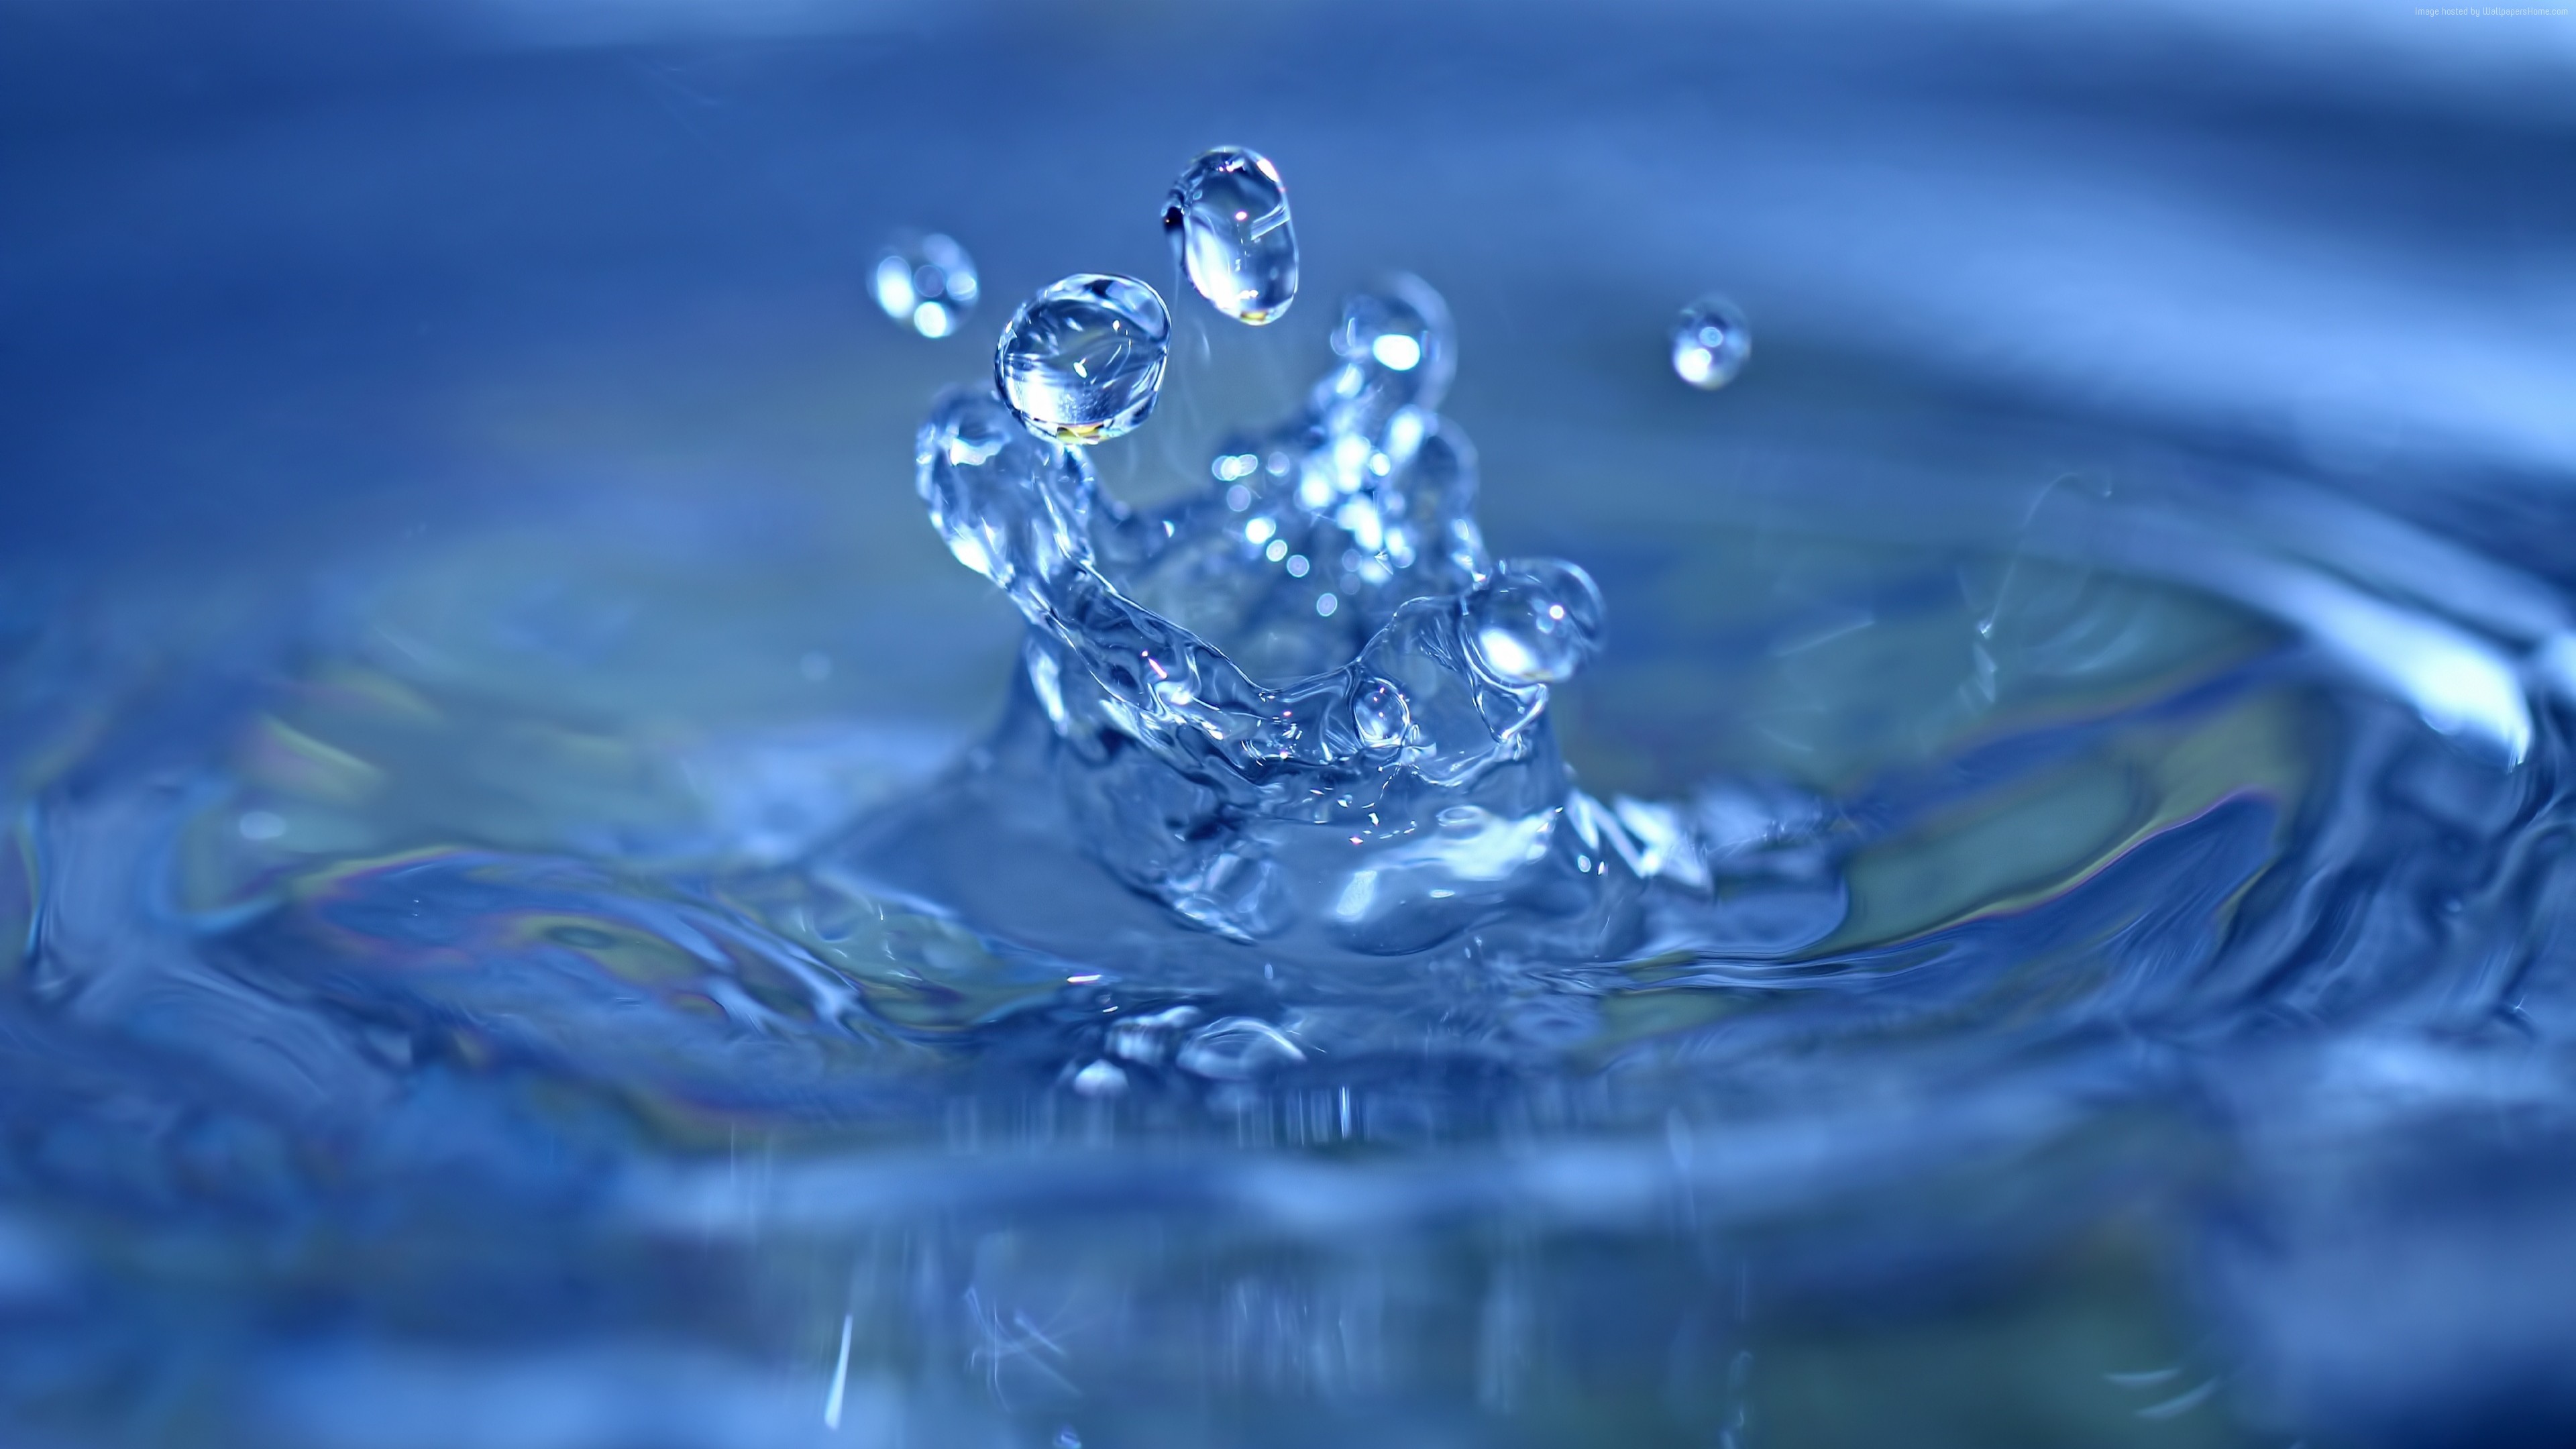 3840x2160 ... Game Water Splash - Cool Match 3 APK for Windows Phone | Android .